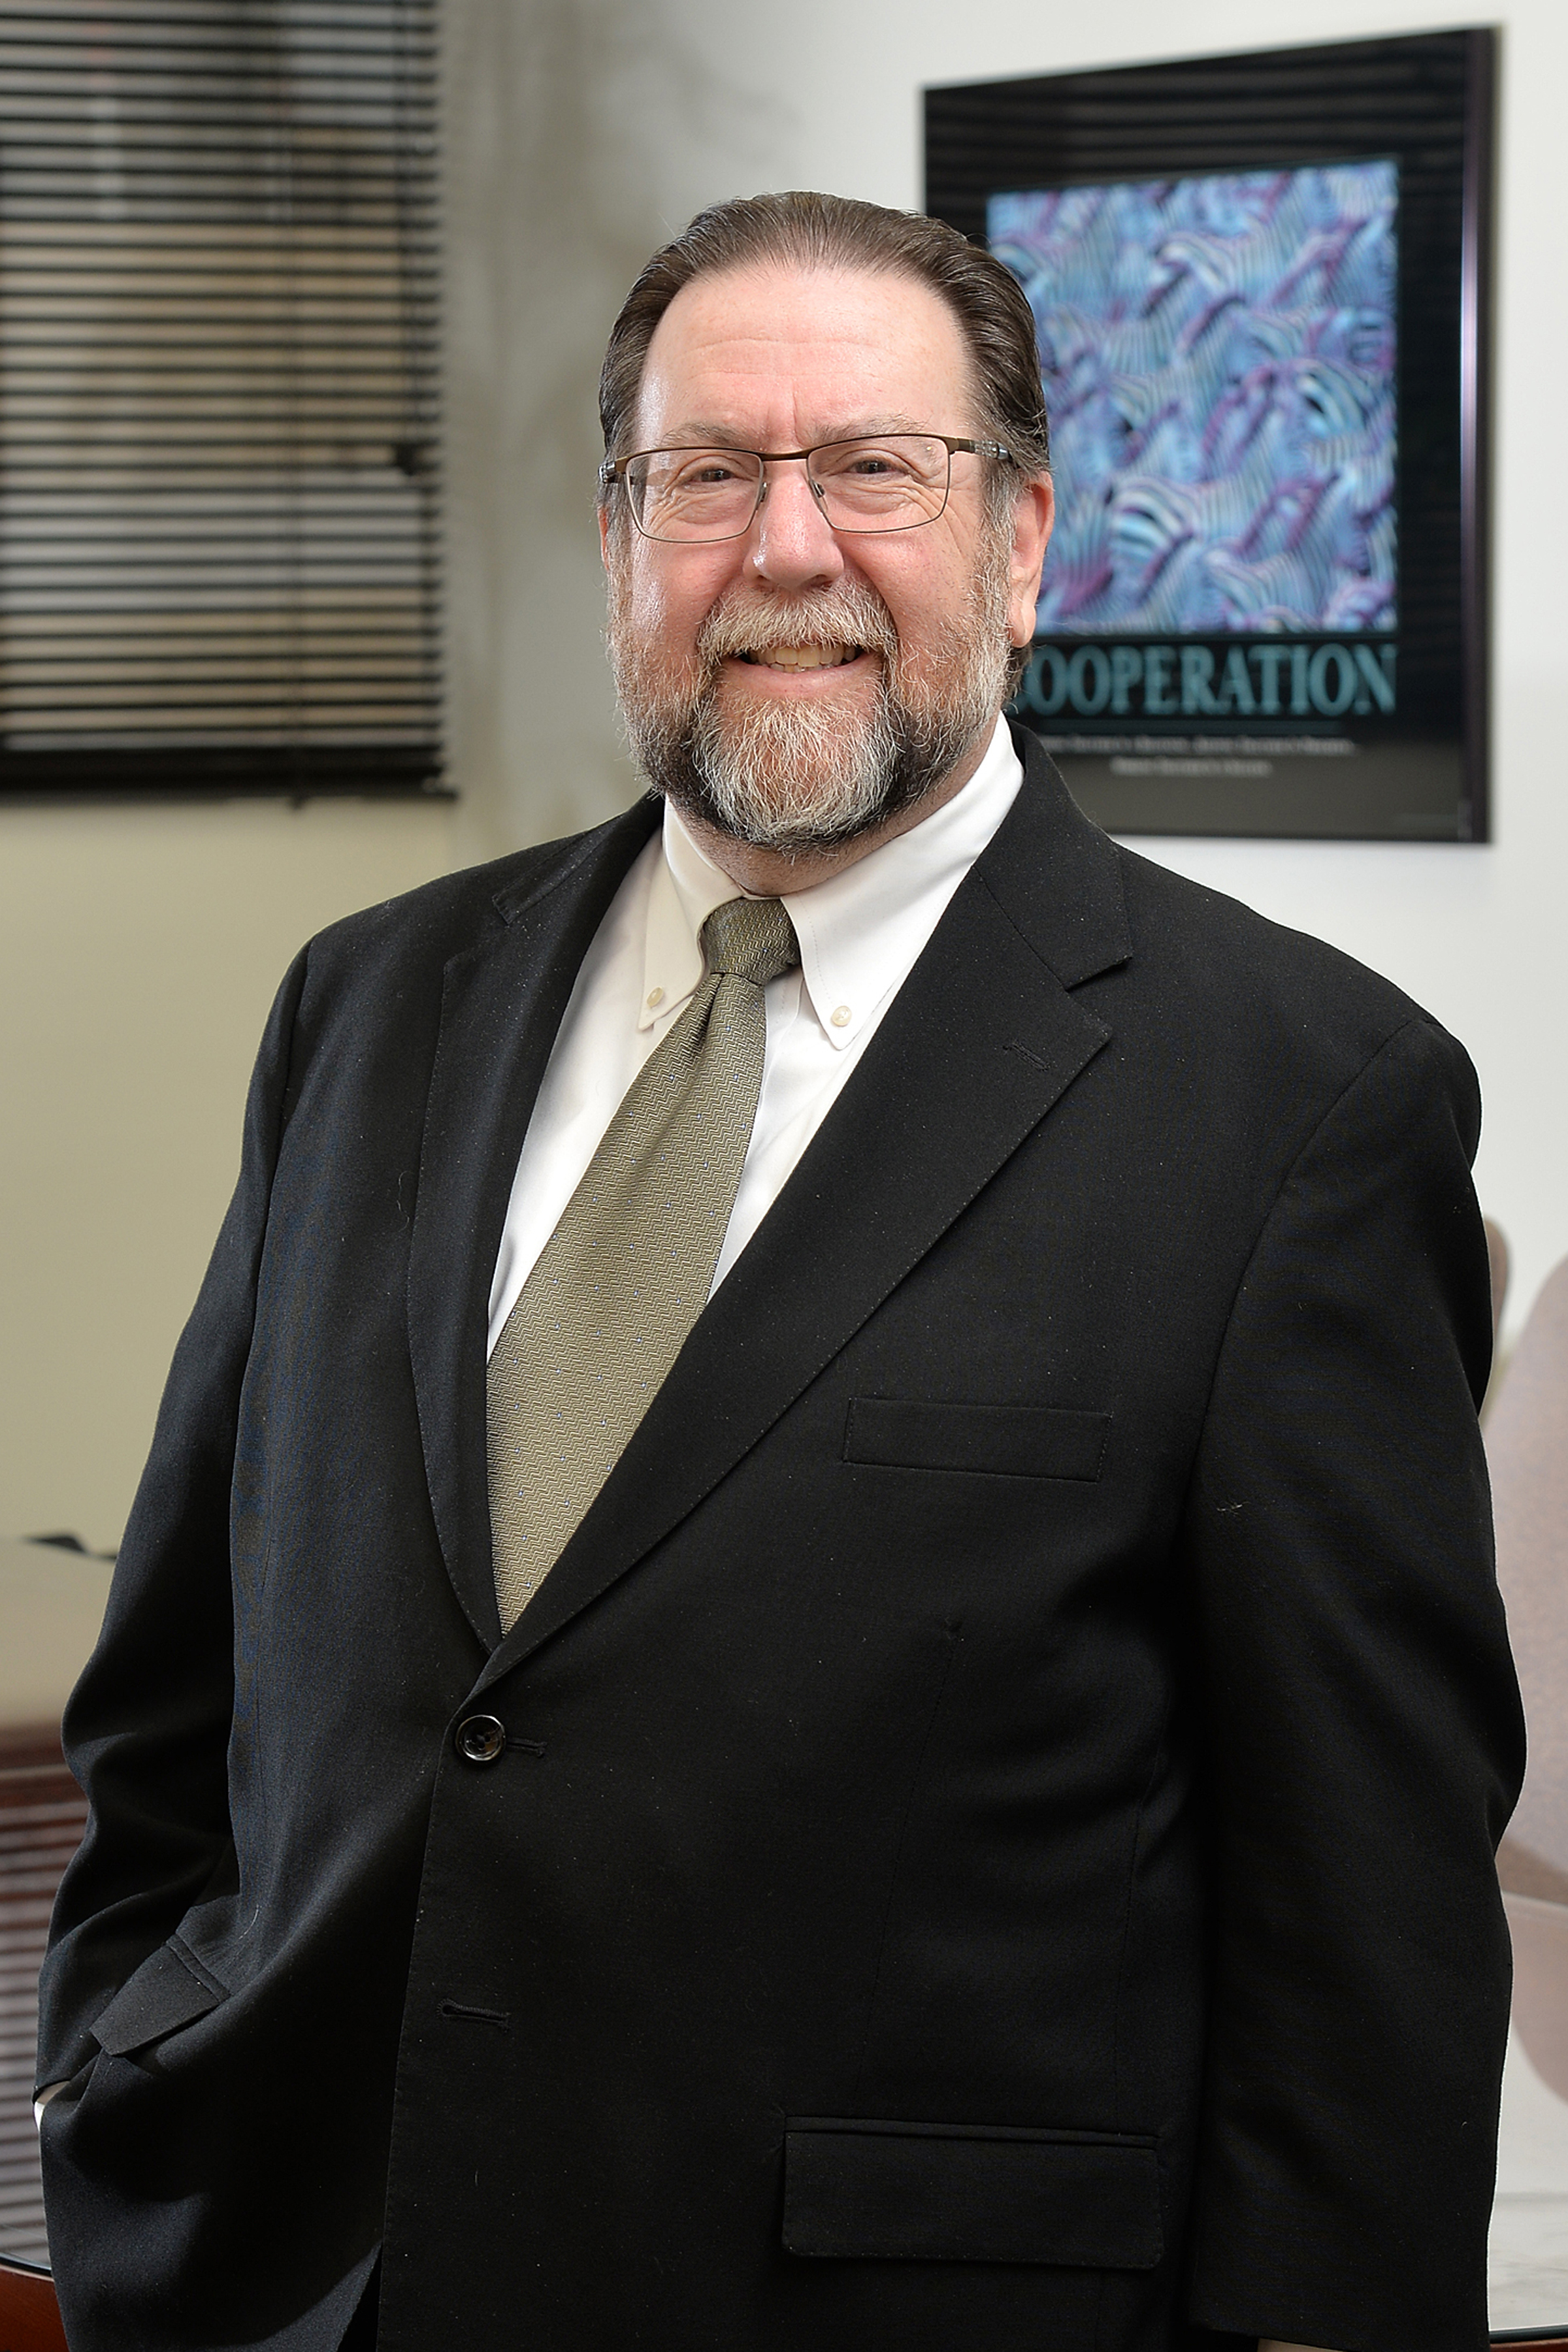 David A. Rubin - Wills, Trusts, Probate, Car Accidents, and Advice to Small Business.